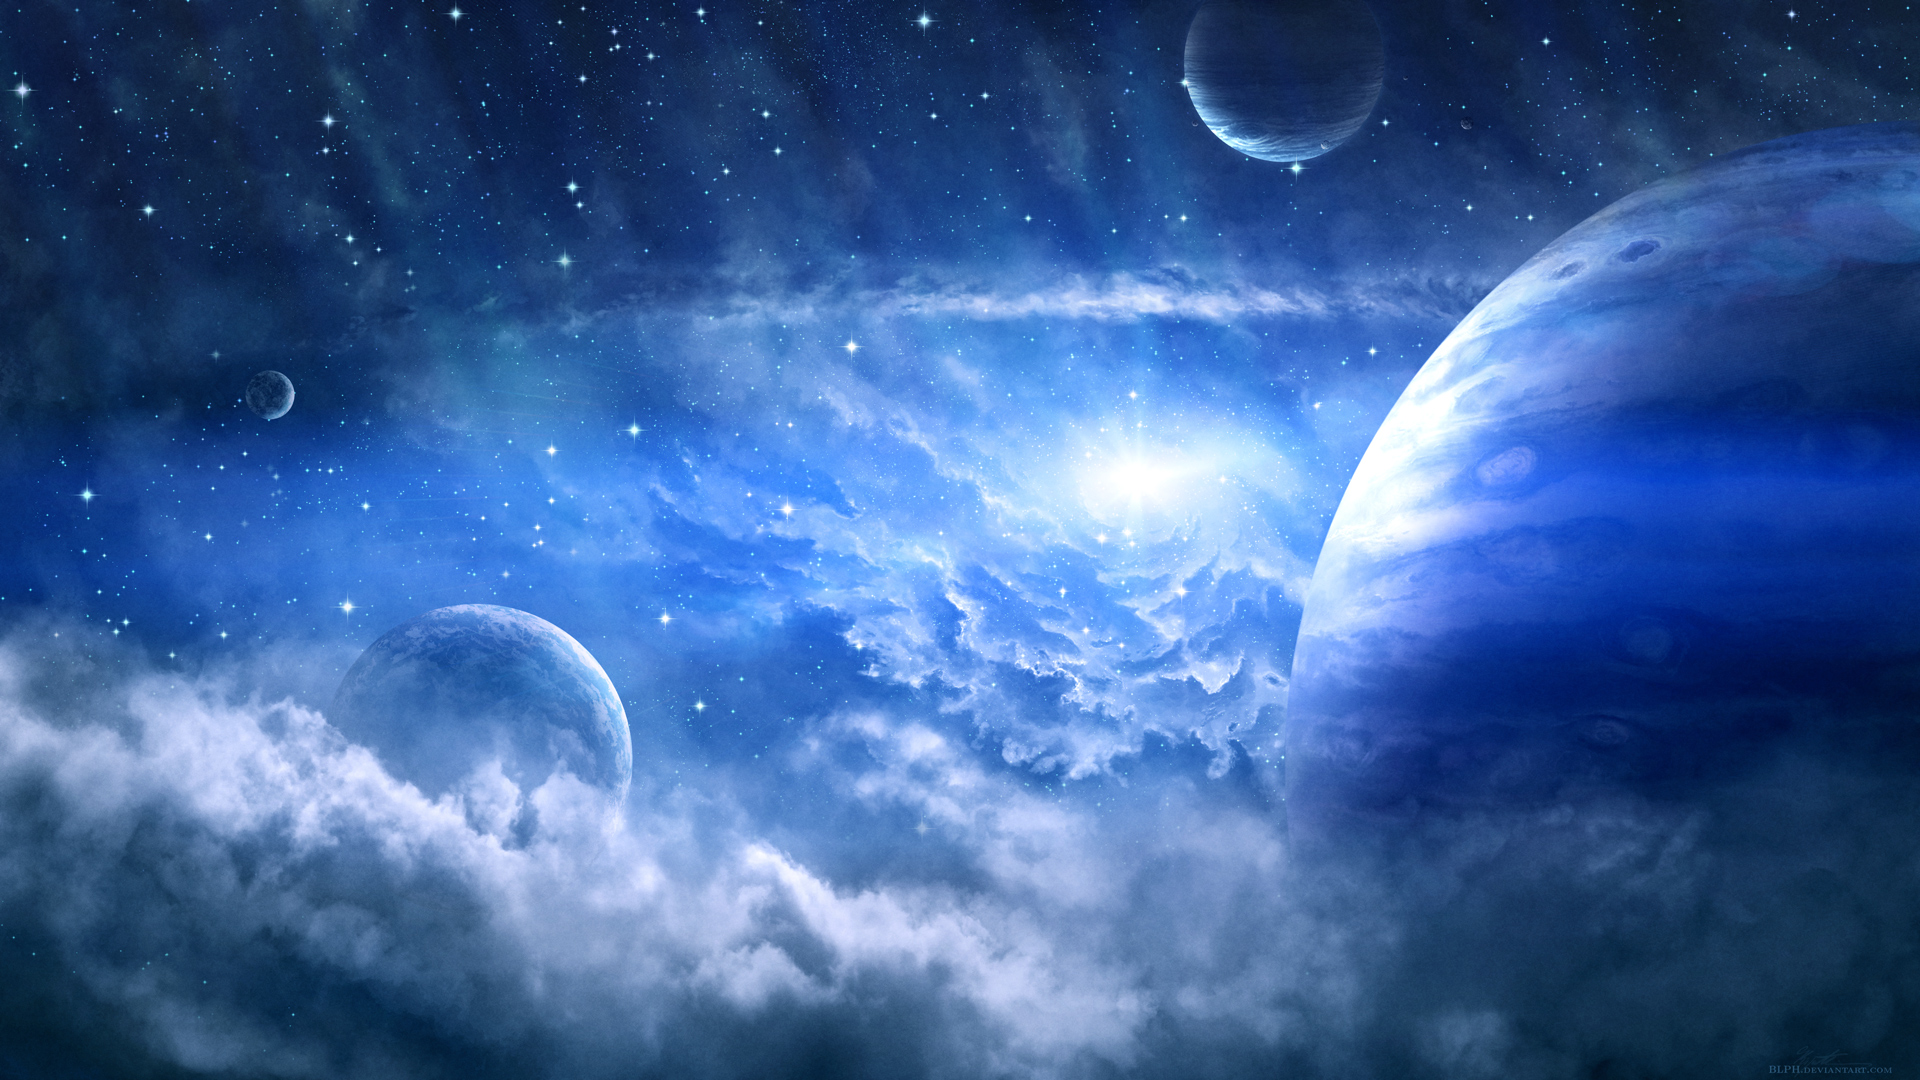 Wallpapers weightlessness outer space astronomy on the desktop